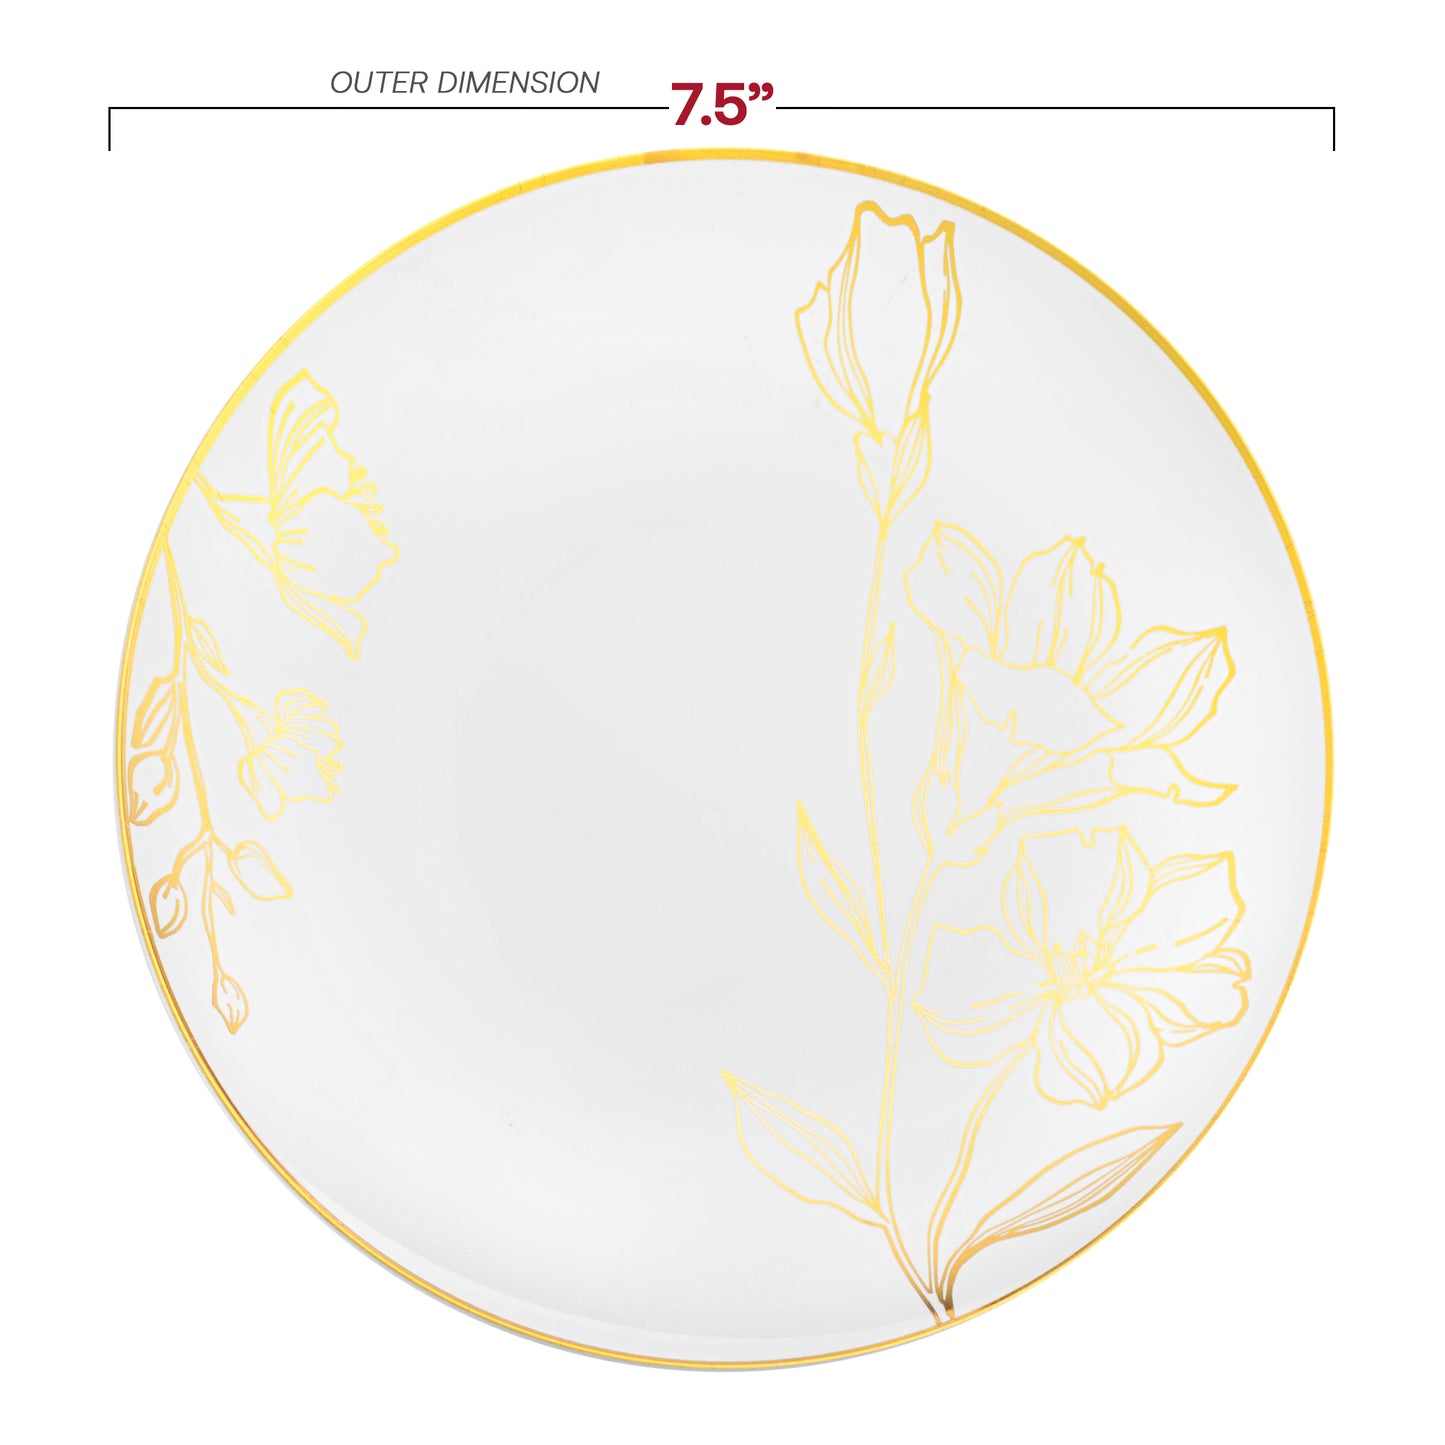 White with Gold Antique Floral Round Disposable Plastic Appetizer/Salad Plates (7.5") Dimension | The Kaya Collection